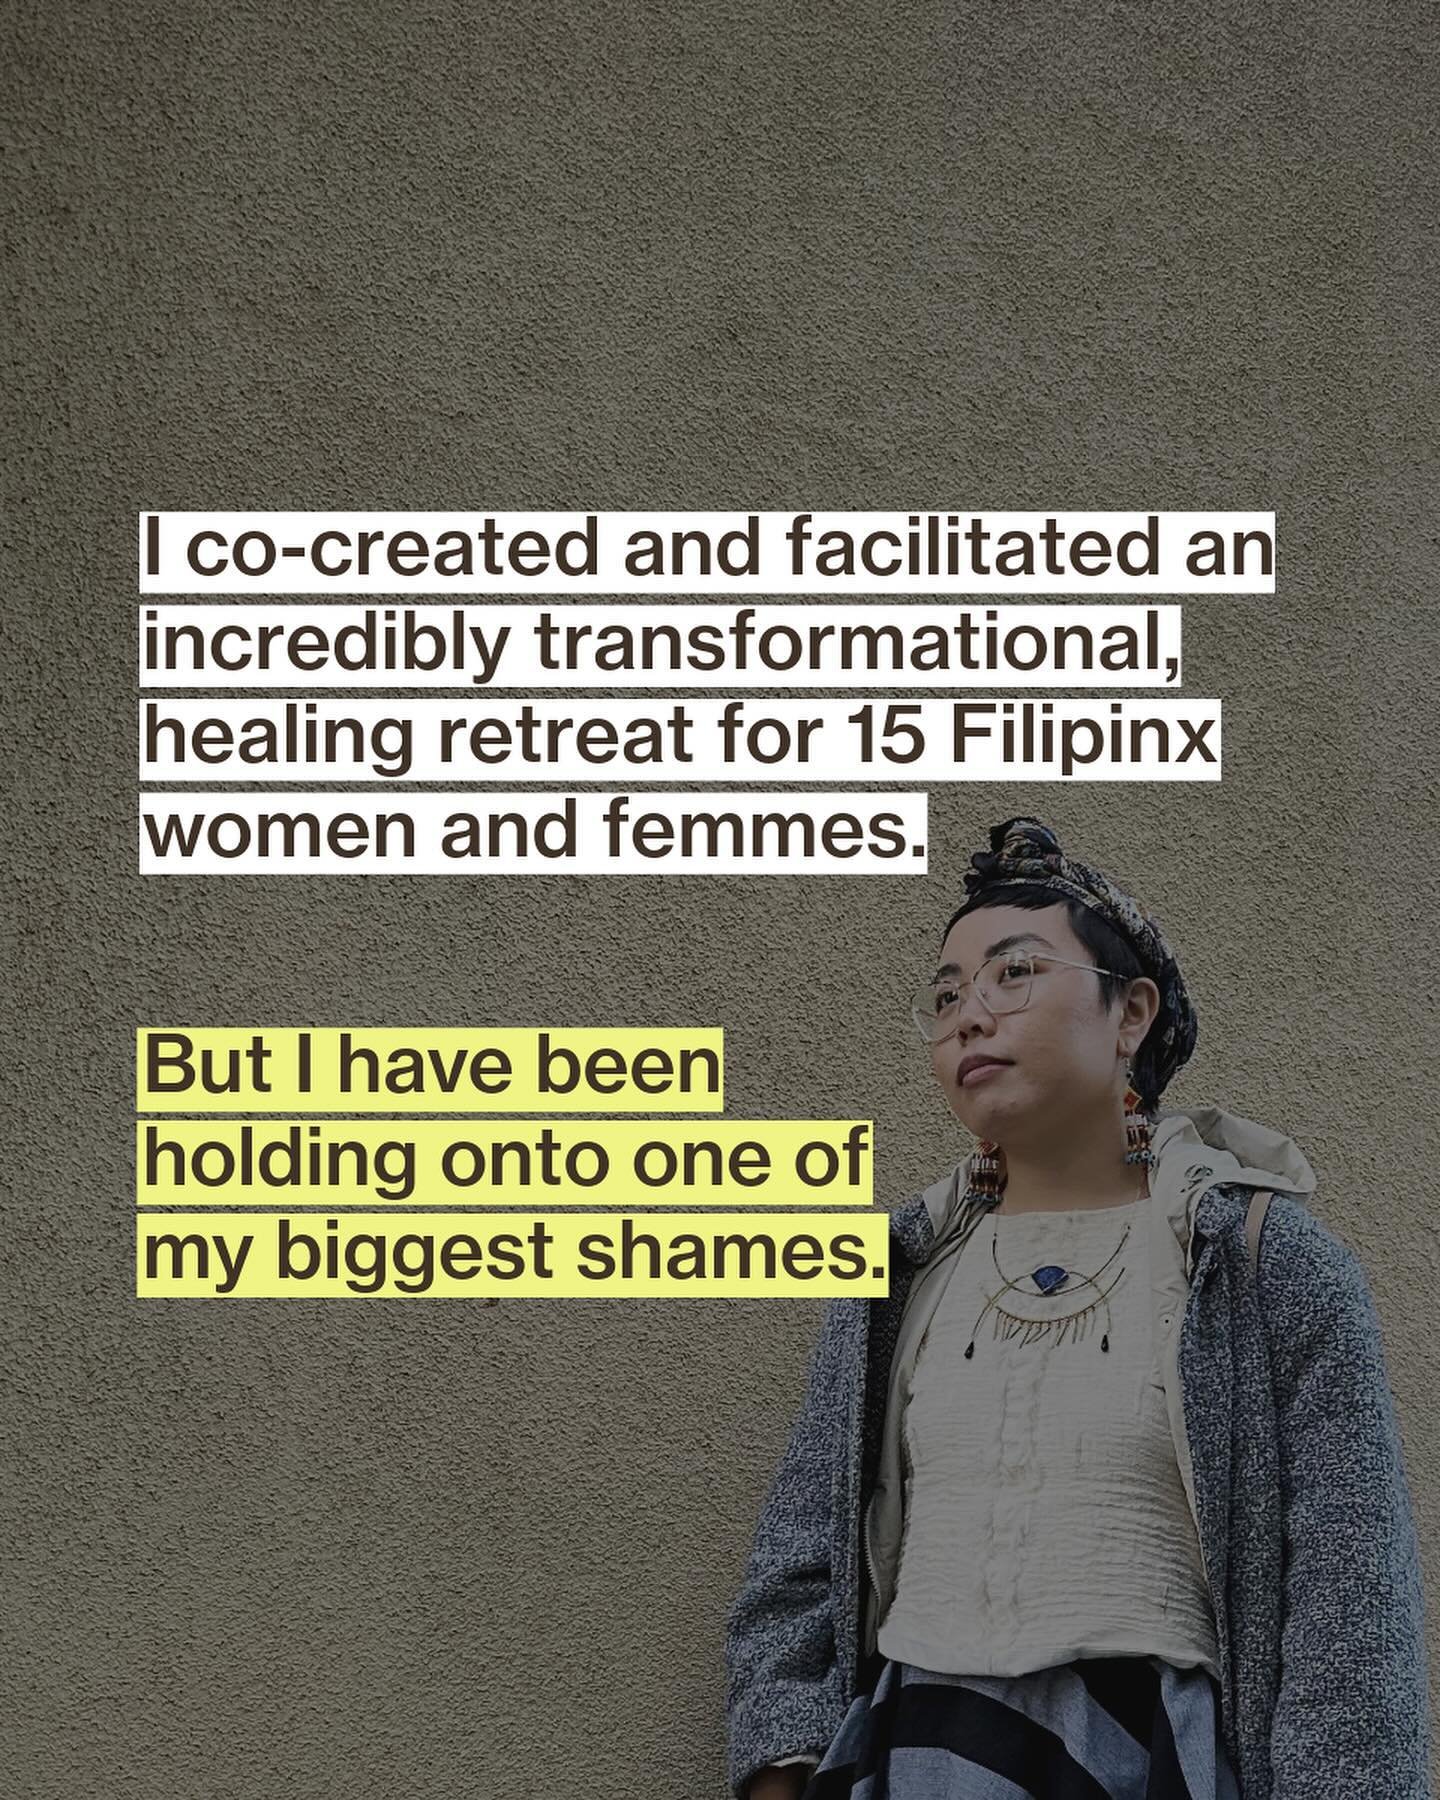 I co-created and facilitated an incredibly transformational, healing retreat for 15 Filipinx women and femmes.

But I have been holding onto one of my biggest shames.

I was actually so burned out and lost money, doing things out of my own pocket and